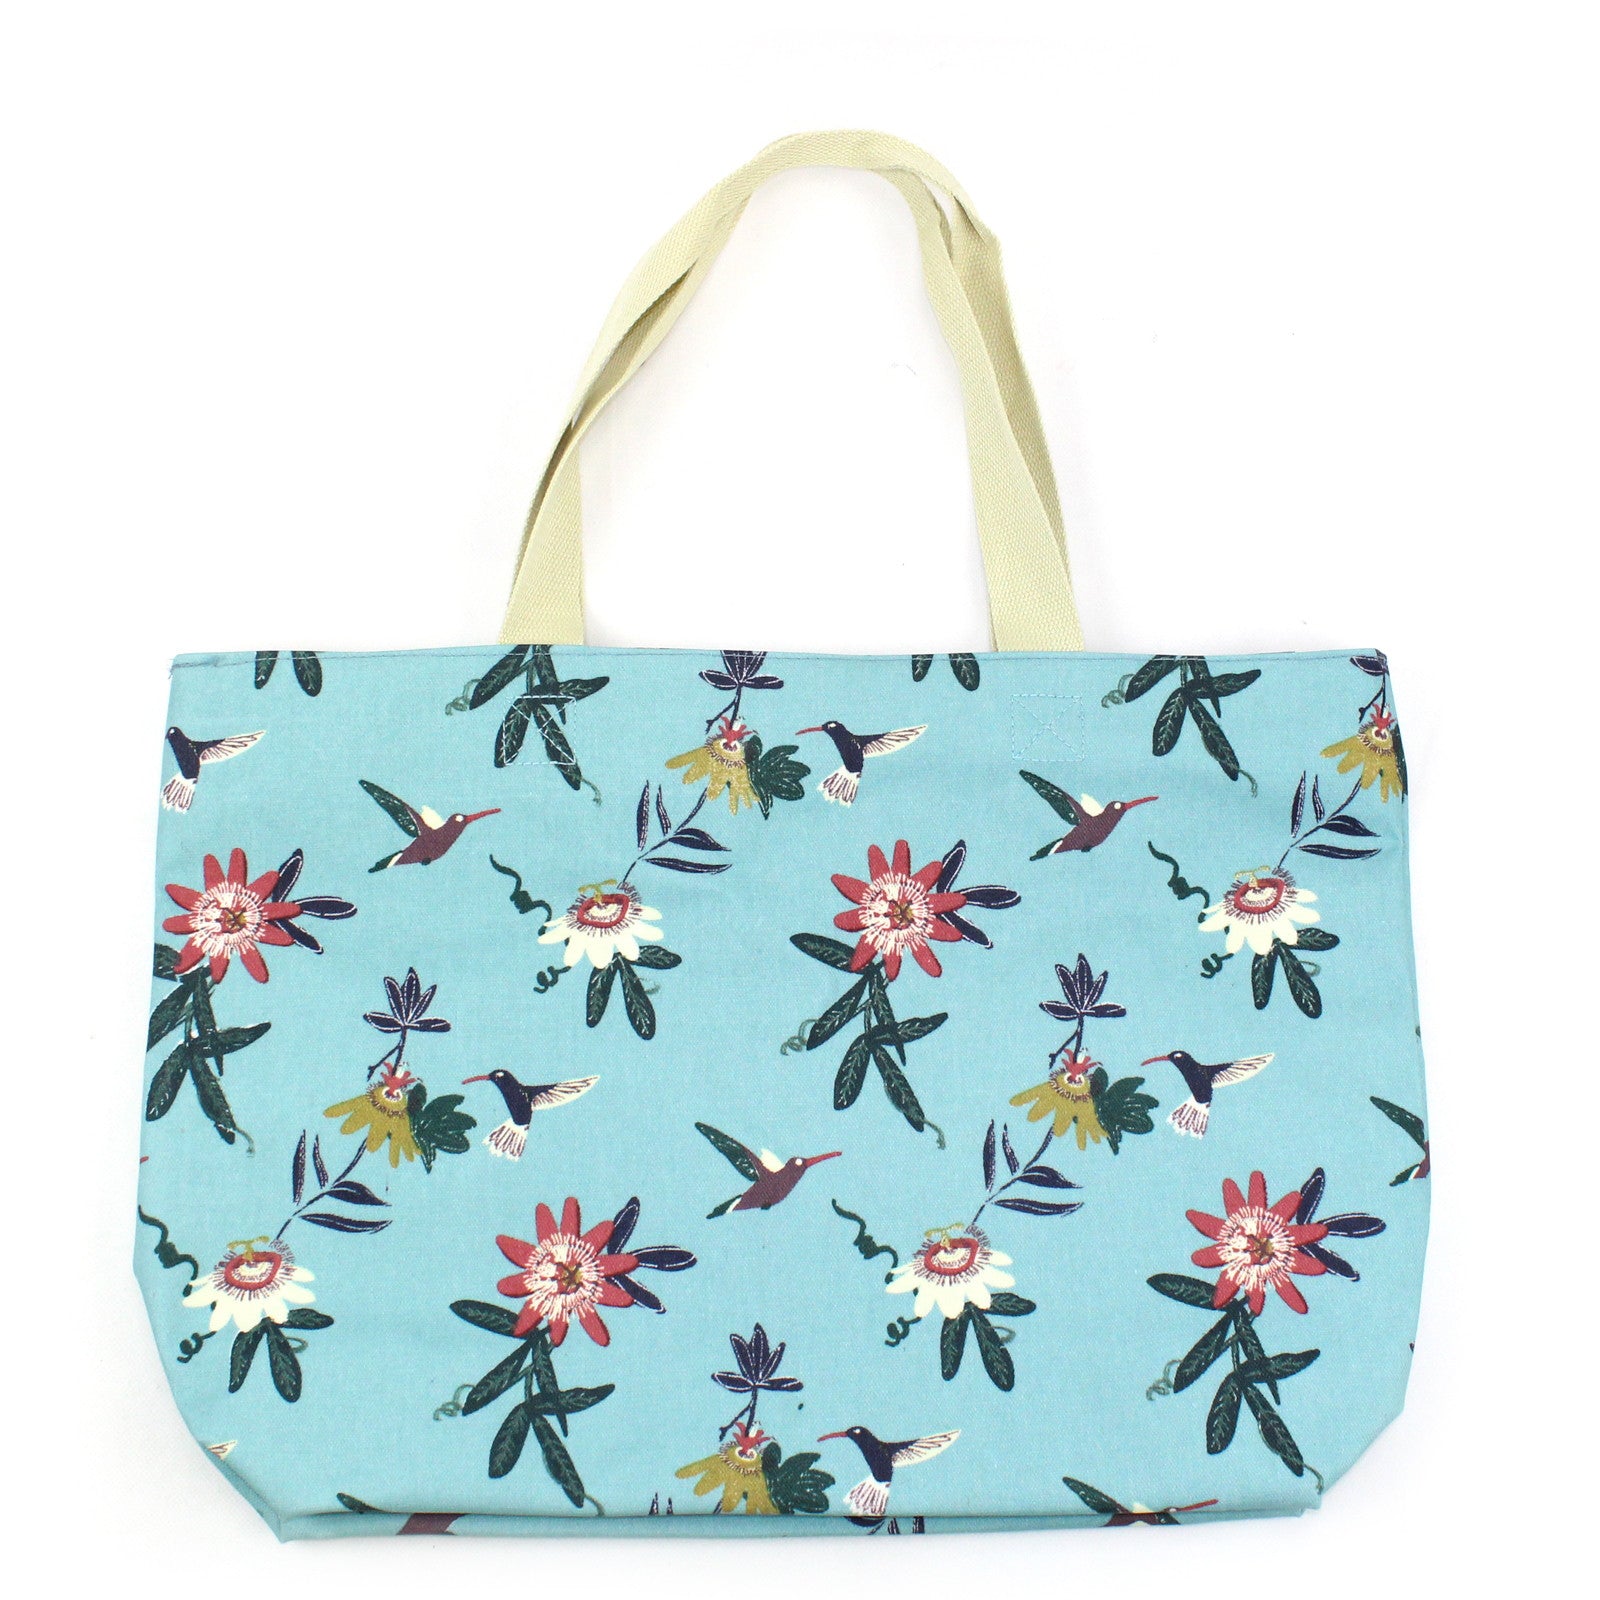 Large matt oil cloth bag with delicate passionflower and colourful hummingbird print